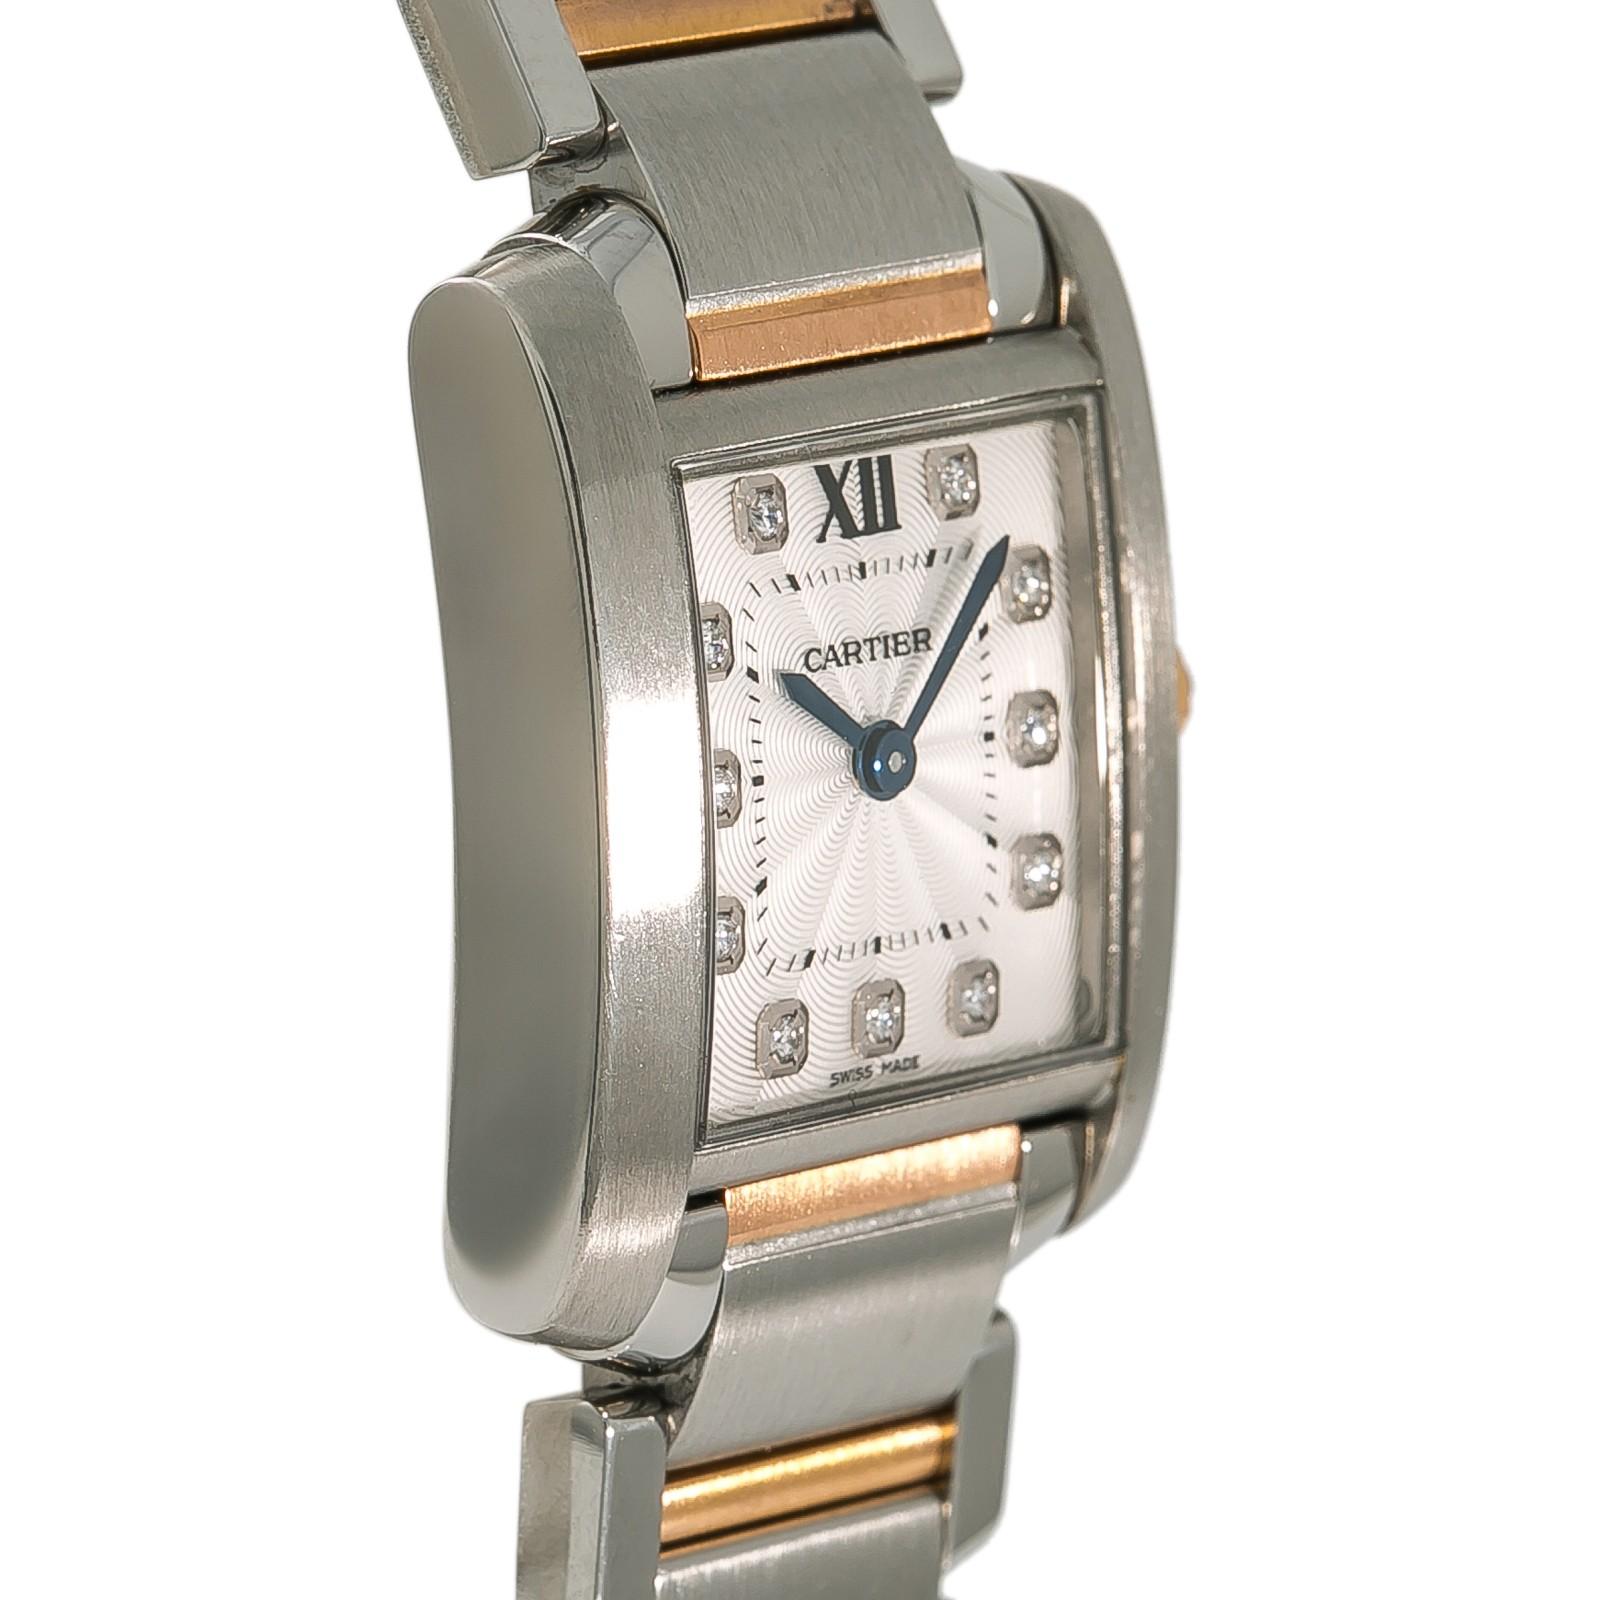 Cartier Tank Francaise5520, Dial Certified Authentic In Excellent Condition For Sale In Miami, FL